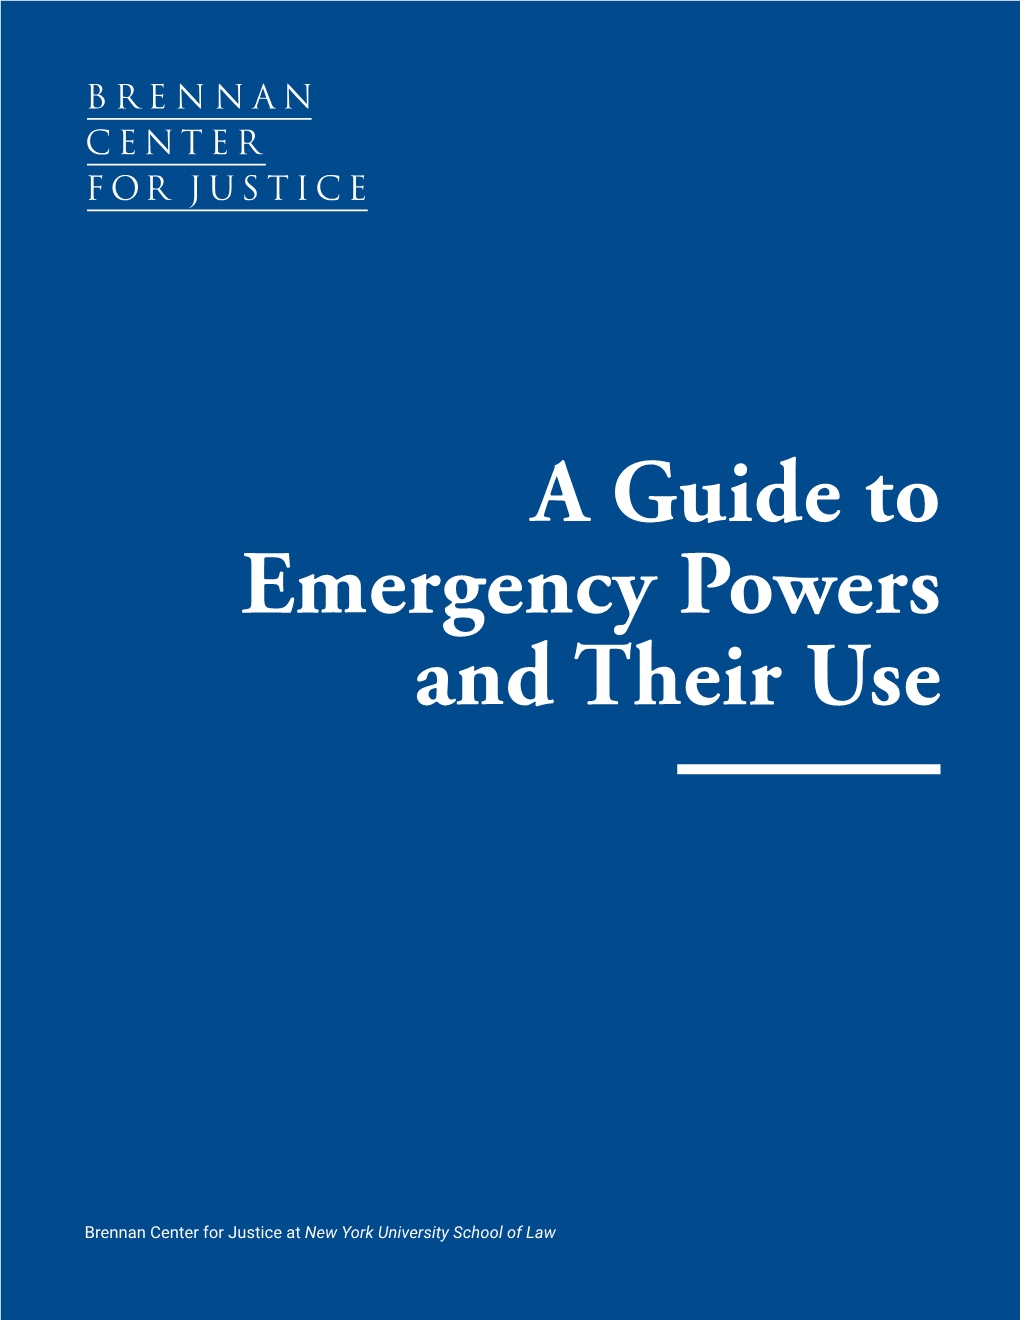 A Guide to Emergency Powers and Their Use